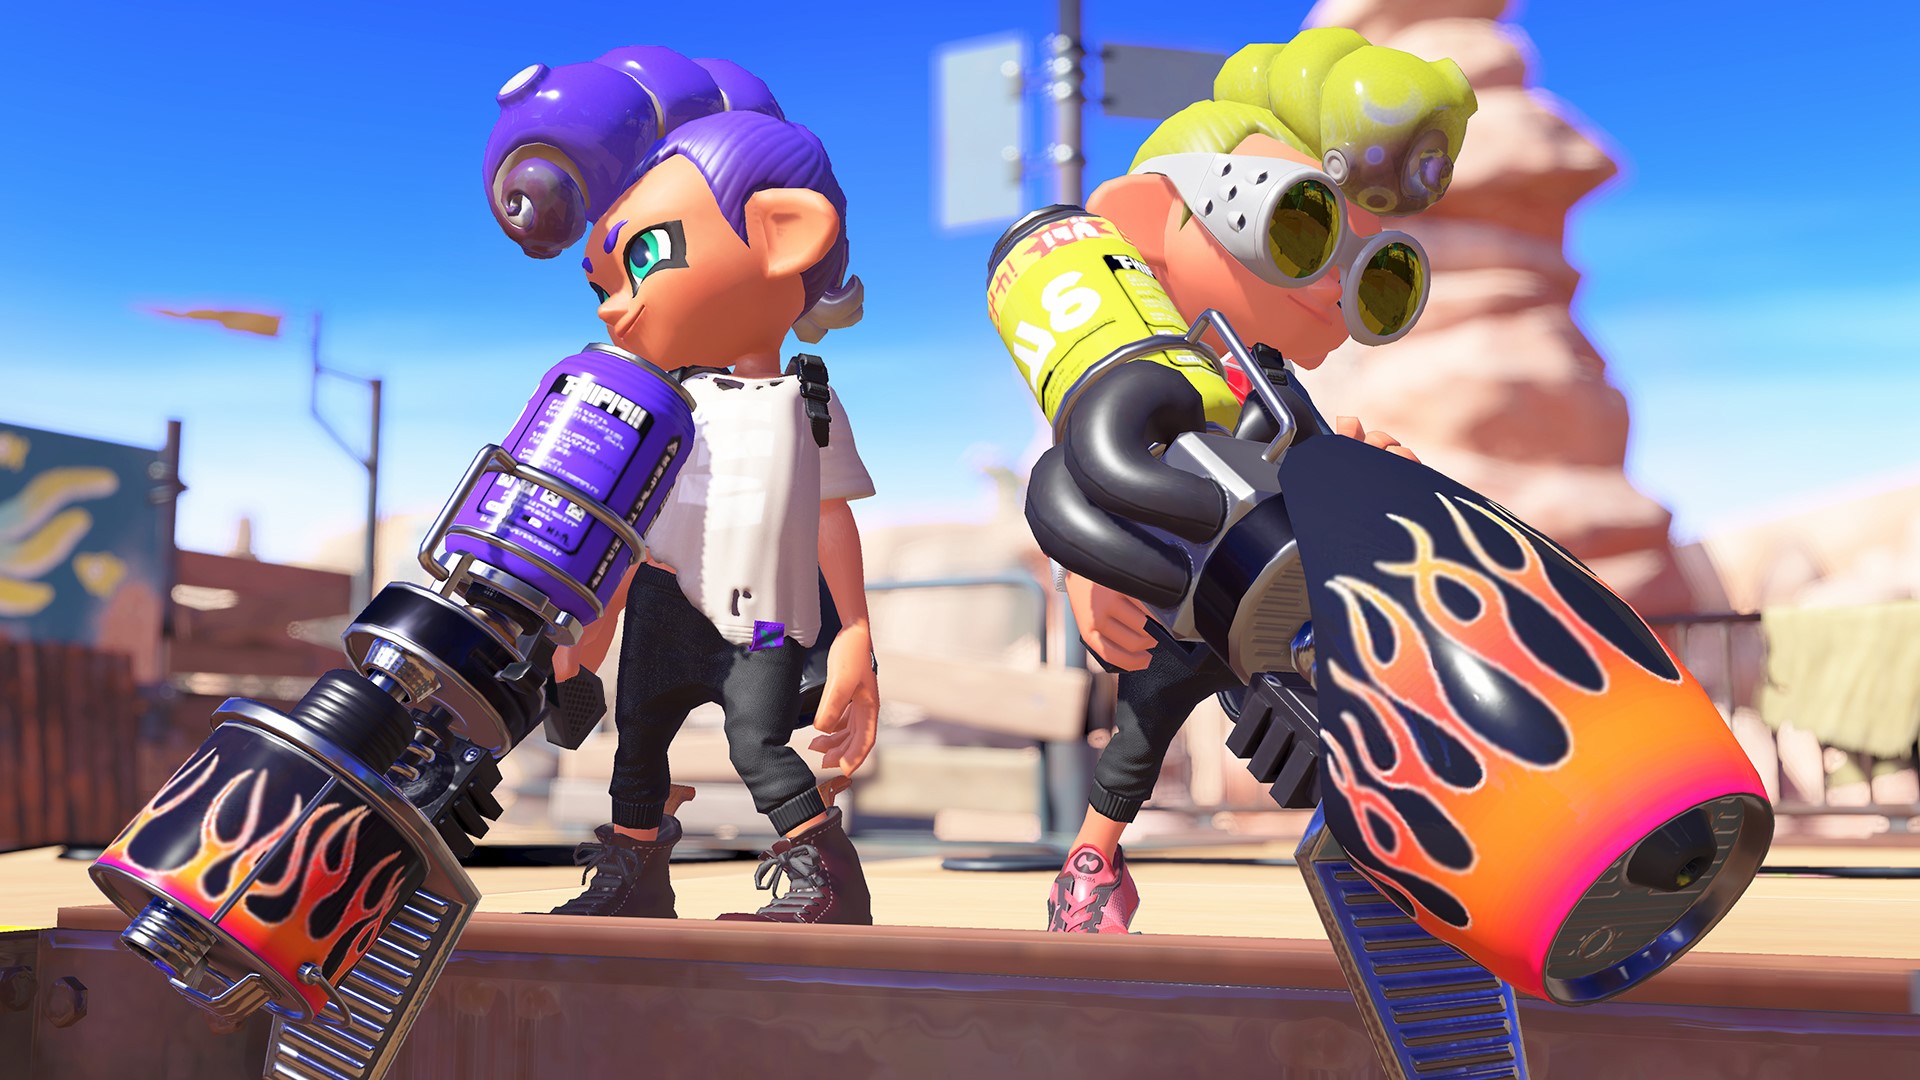 Splatoon 3 direct is set for August 2022